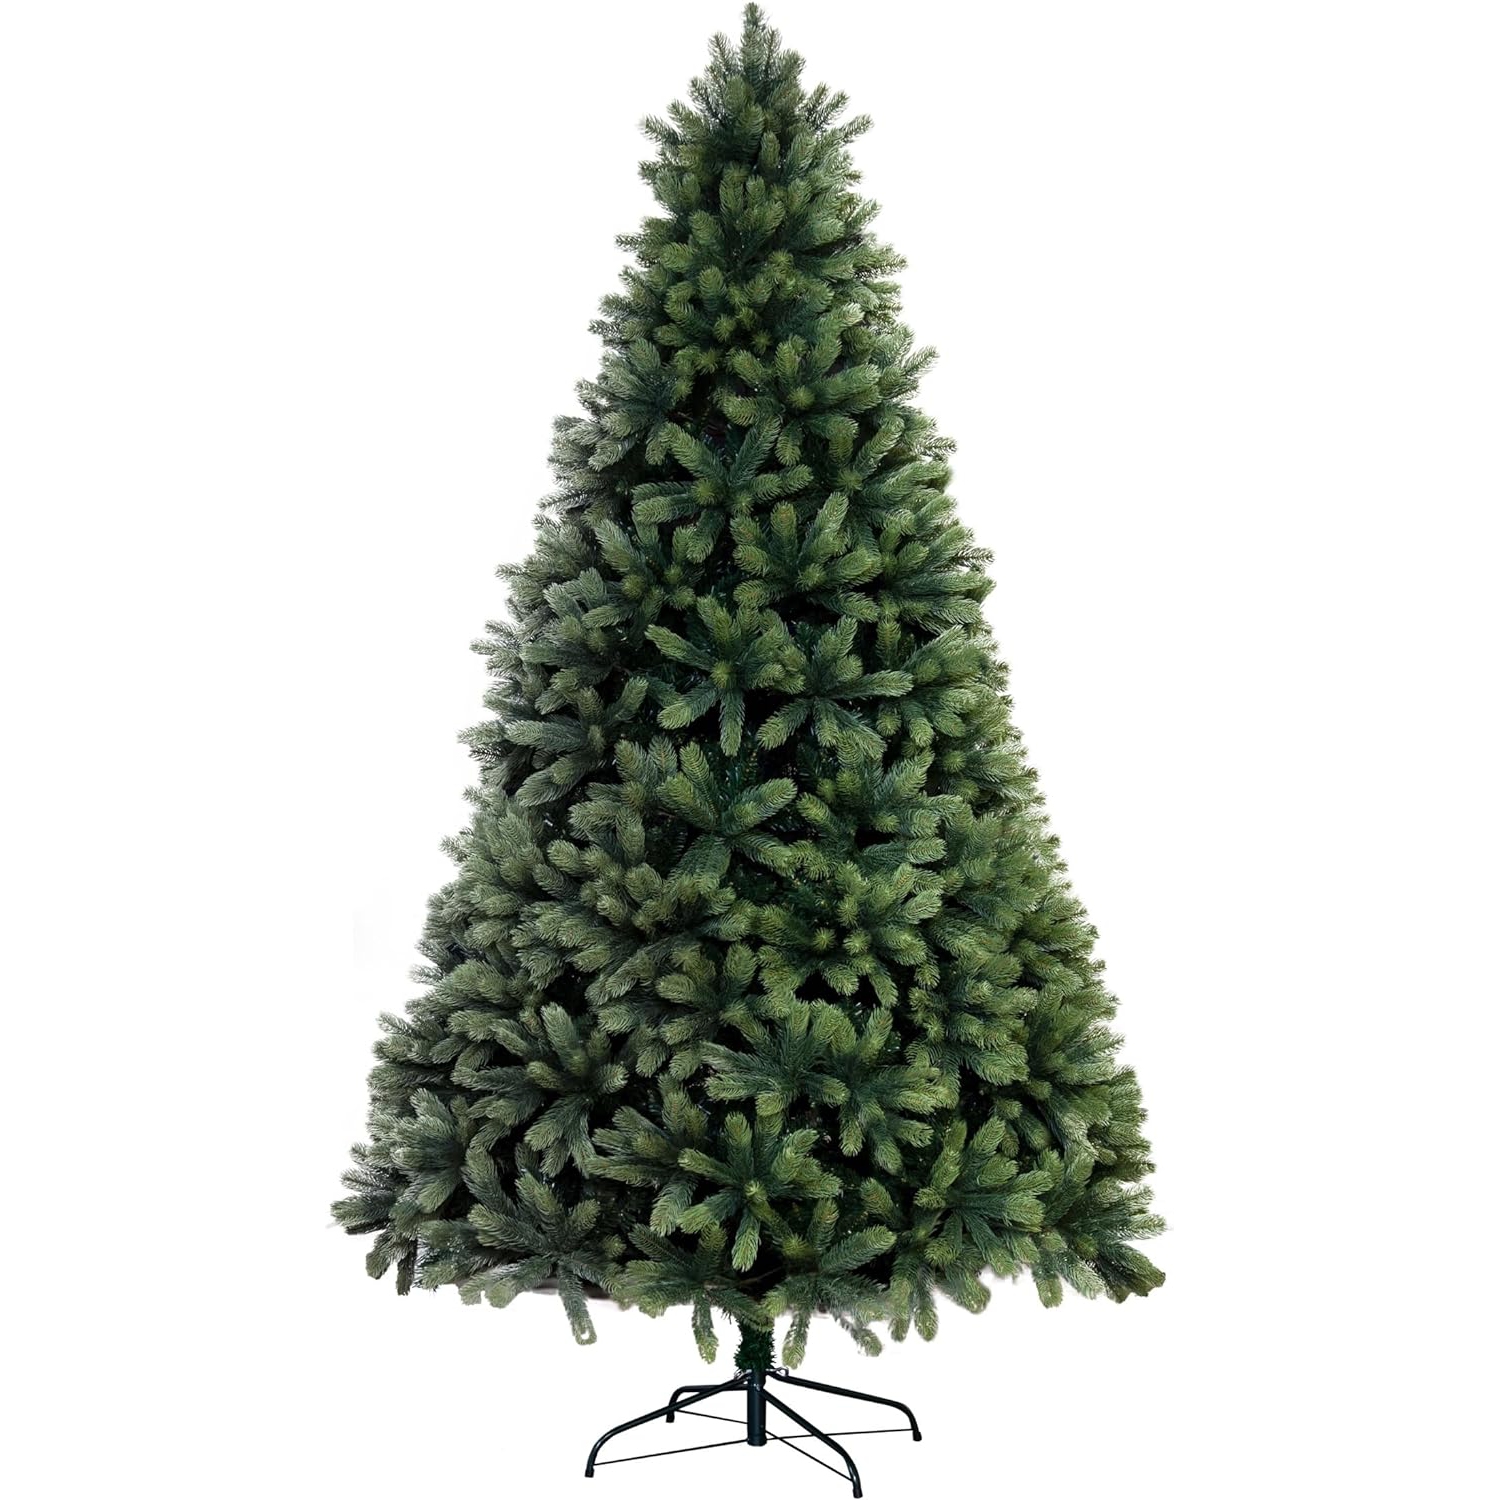 7FT Artificial Christmas Tree, Holiday Xmas Tree Decoration Pine Tree with 1100 Branch Tips W/ Metal Stand & Gloves